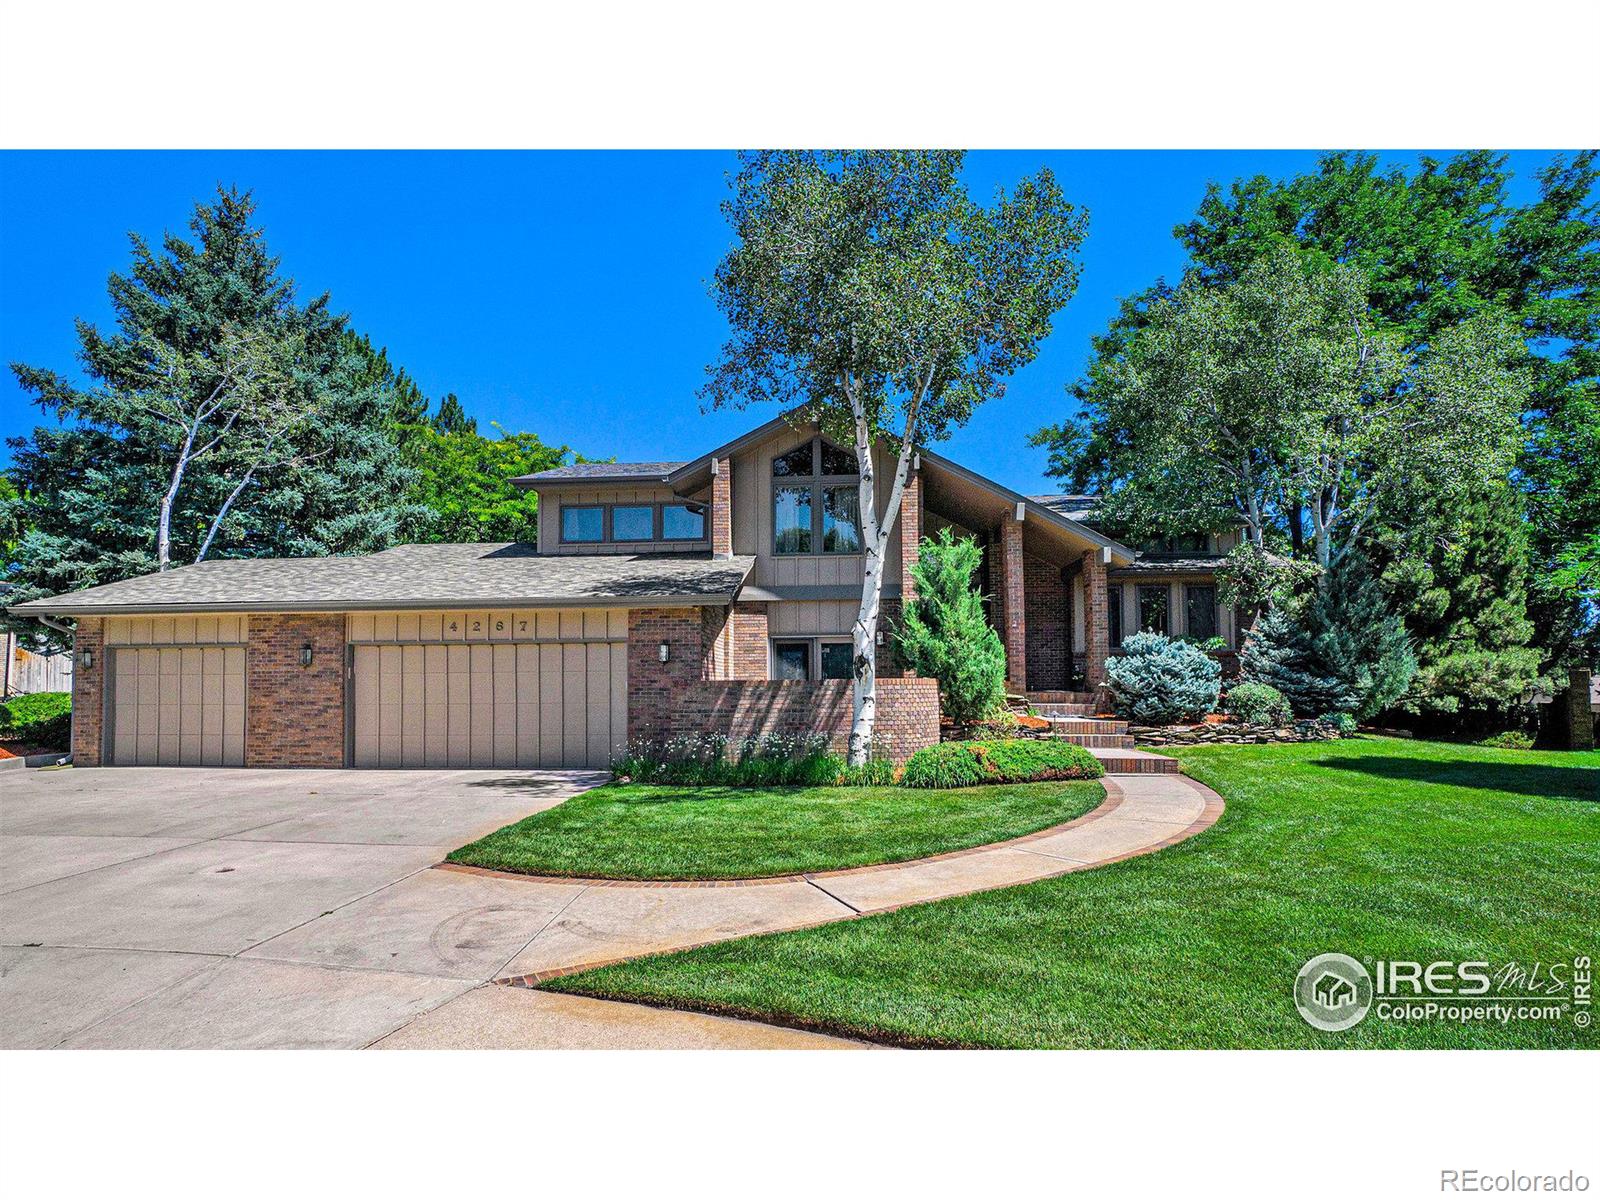 4267 W 14th St Rd, greeley MLS: 4567891001730 Beds: 4 Baths: 4 Price: $769,900